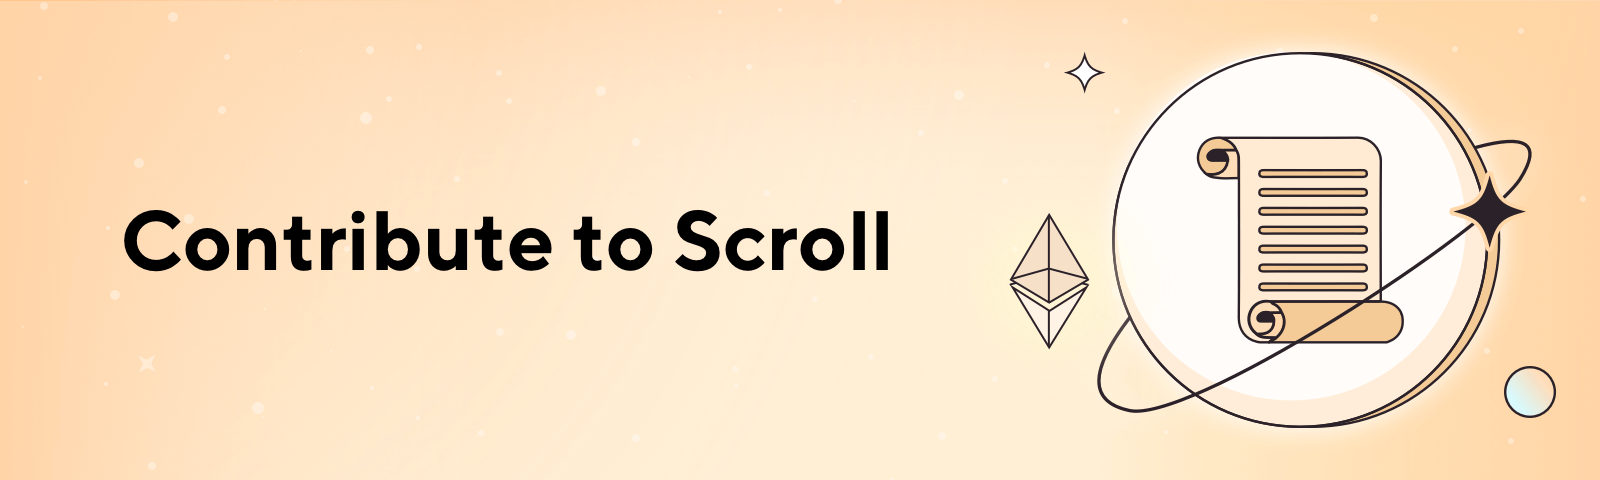 Contribute to Scroll